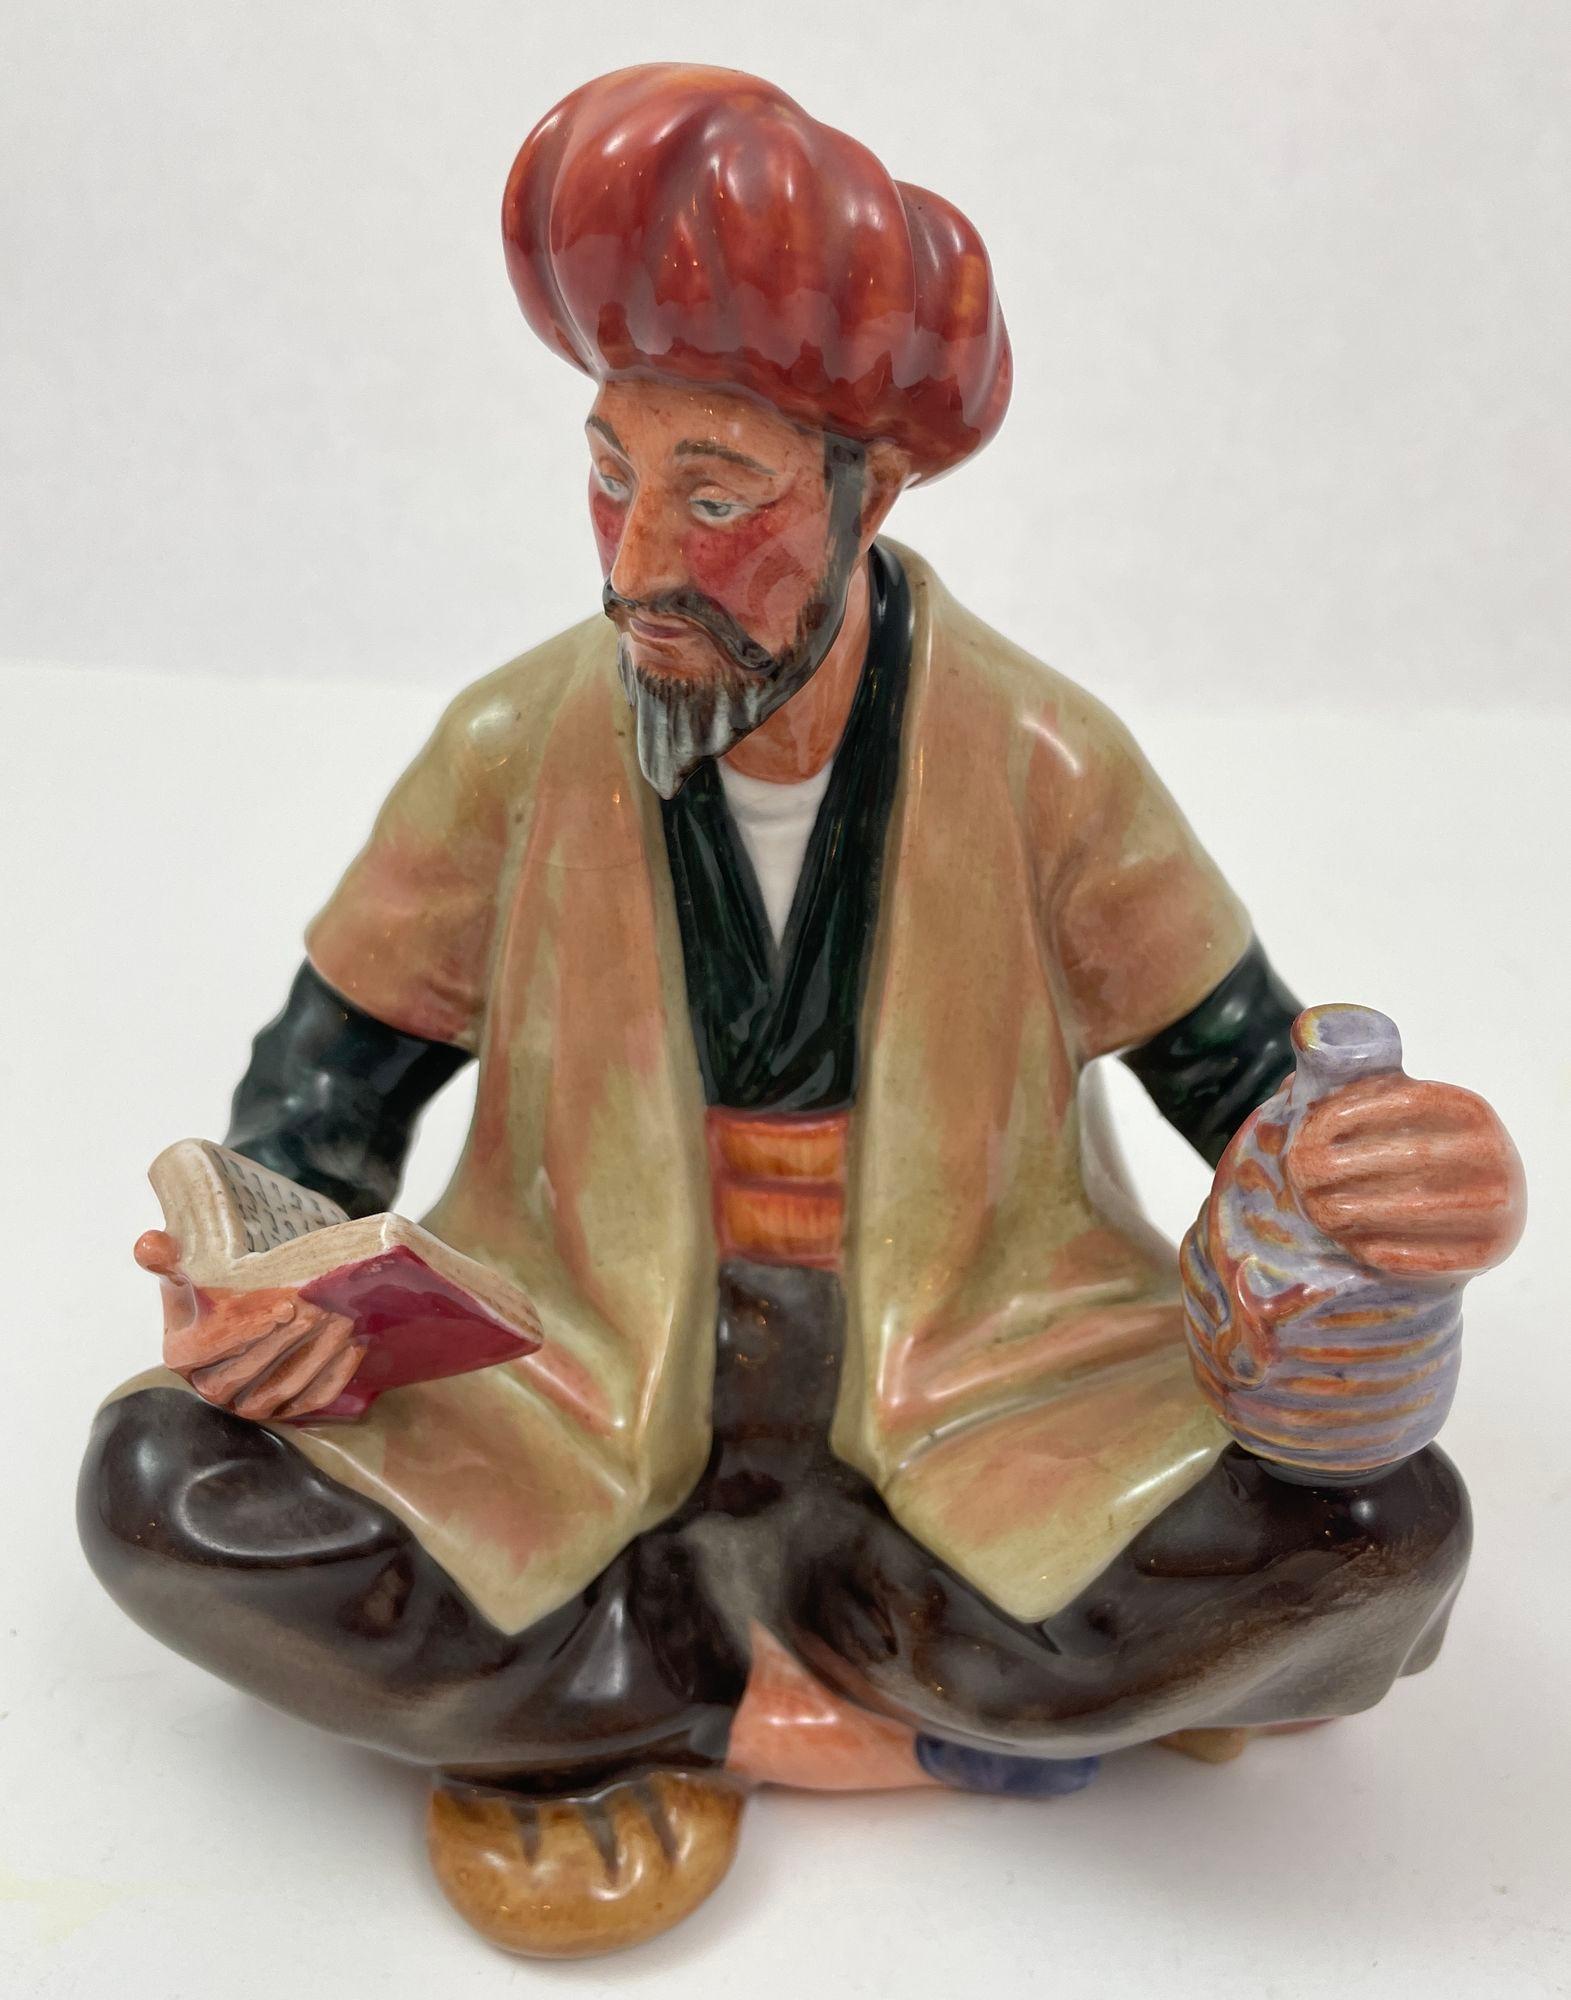 Vintage Royal Doulton “Omar Khayyam” Persian Scholar 1964 Decorative Porcelain Figurine.
Made in England, by Royal Doulton England. finely painted porcelain figure collectable, high gloss finish, marked on the bottom.
This figurine was produced in